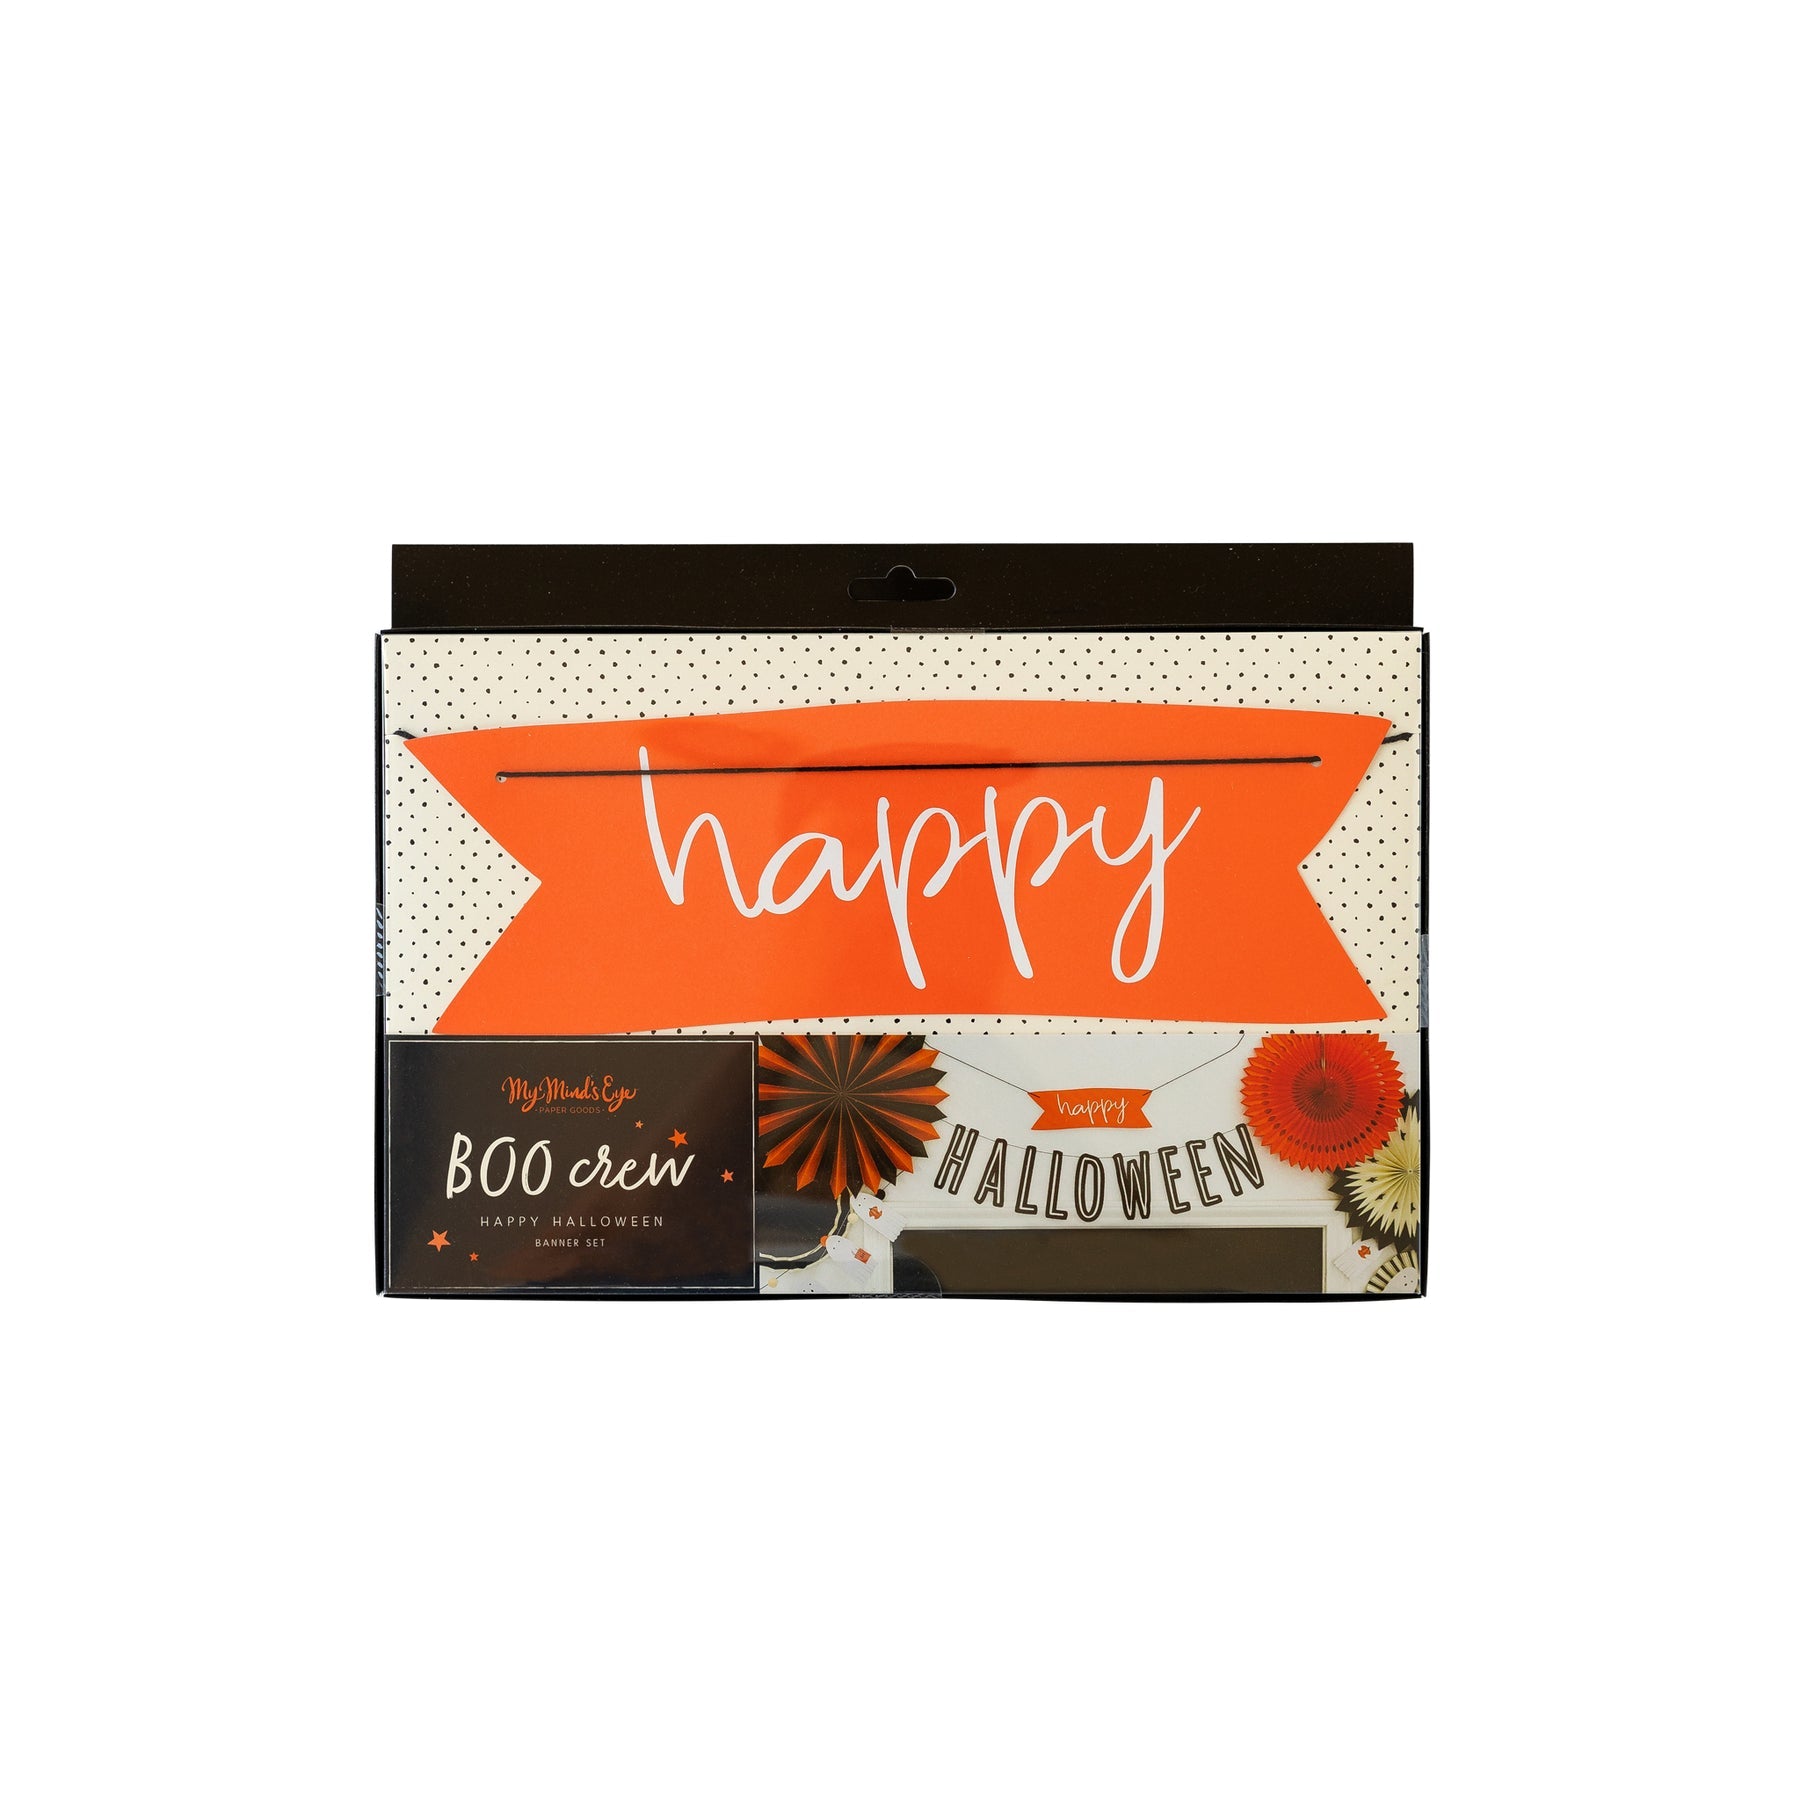 Boo Crew Happy Halloween Banner - Favorite Little Things Co